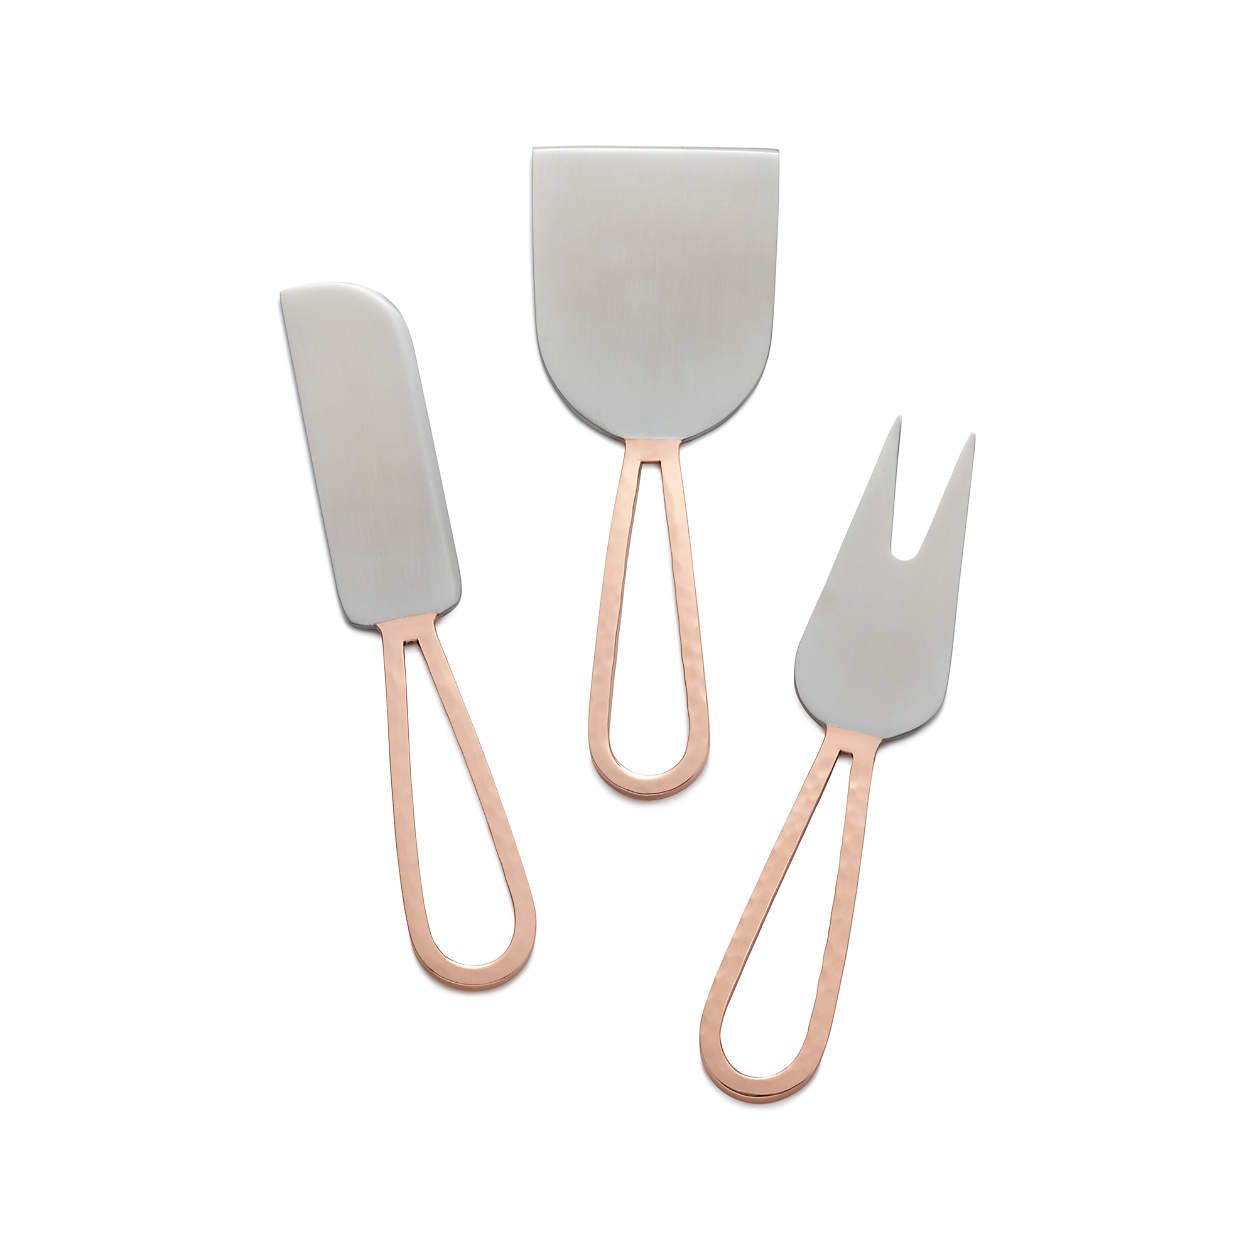 Copper Cheese Knives | Crate and Barrel | Crate & Barrel